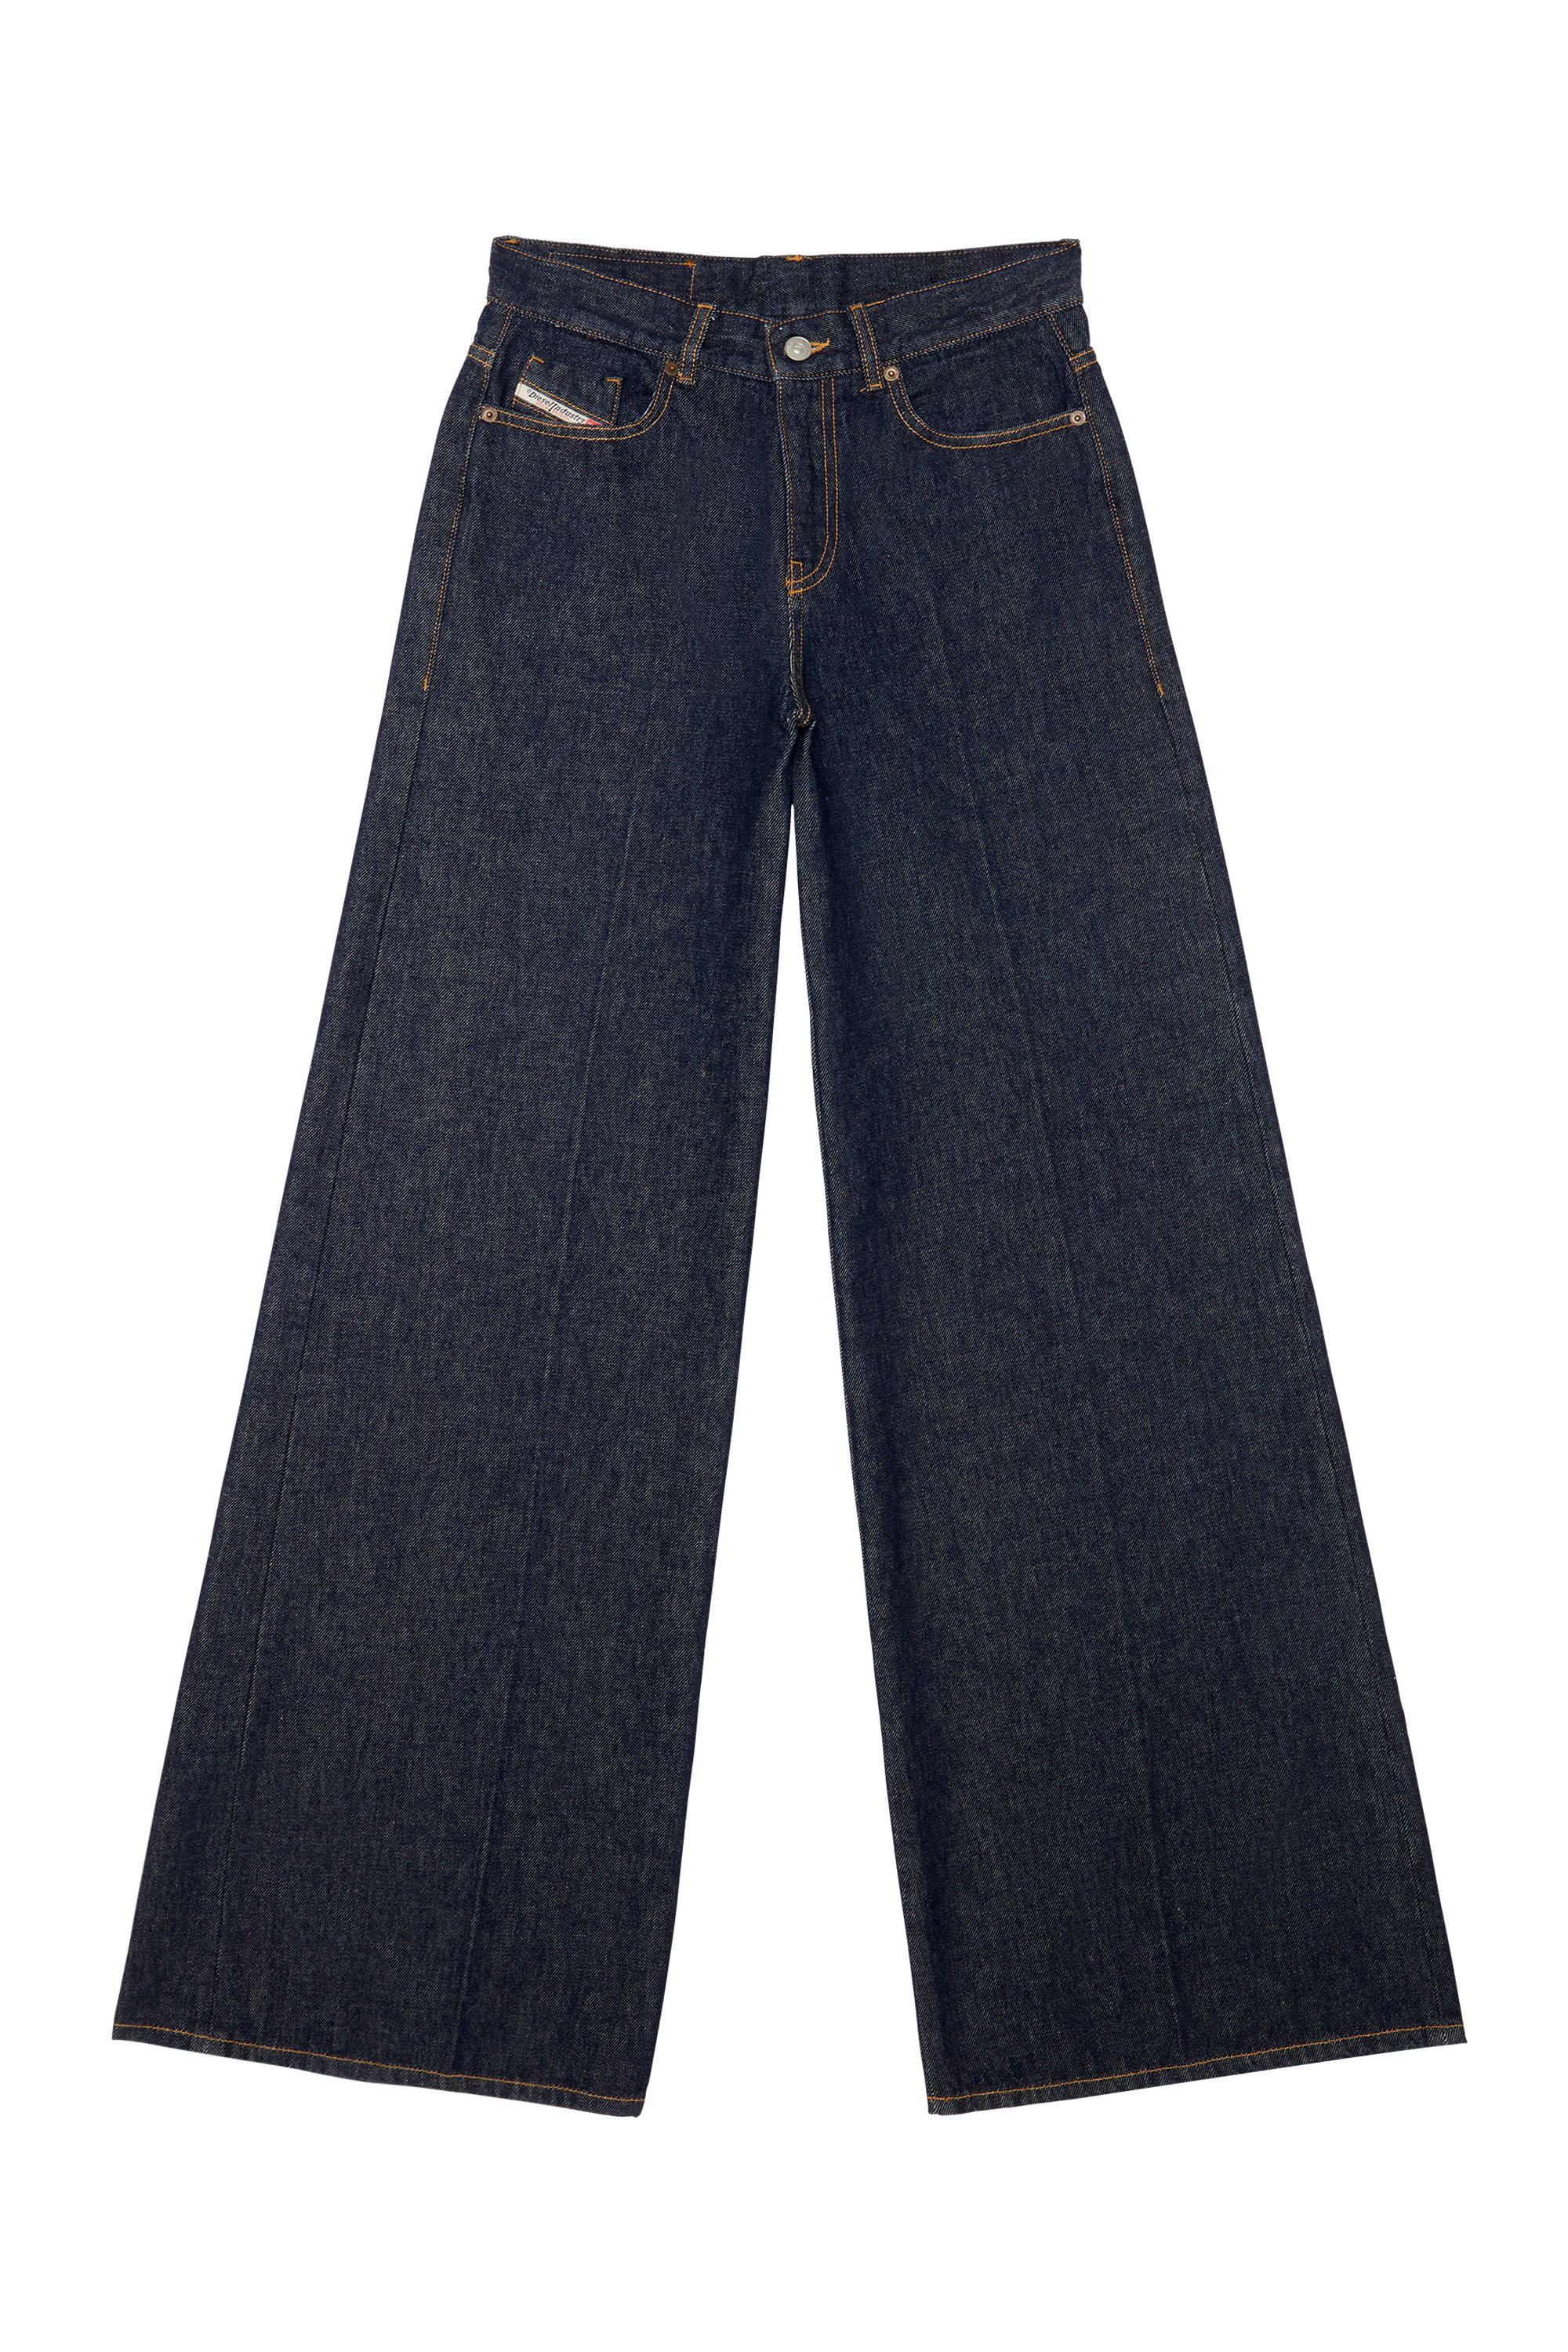 Bootcut and Flare Jeans 1978 D-Akemi Z9C02, Dunkelblau - Jeans